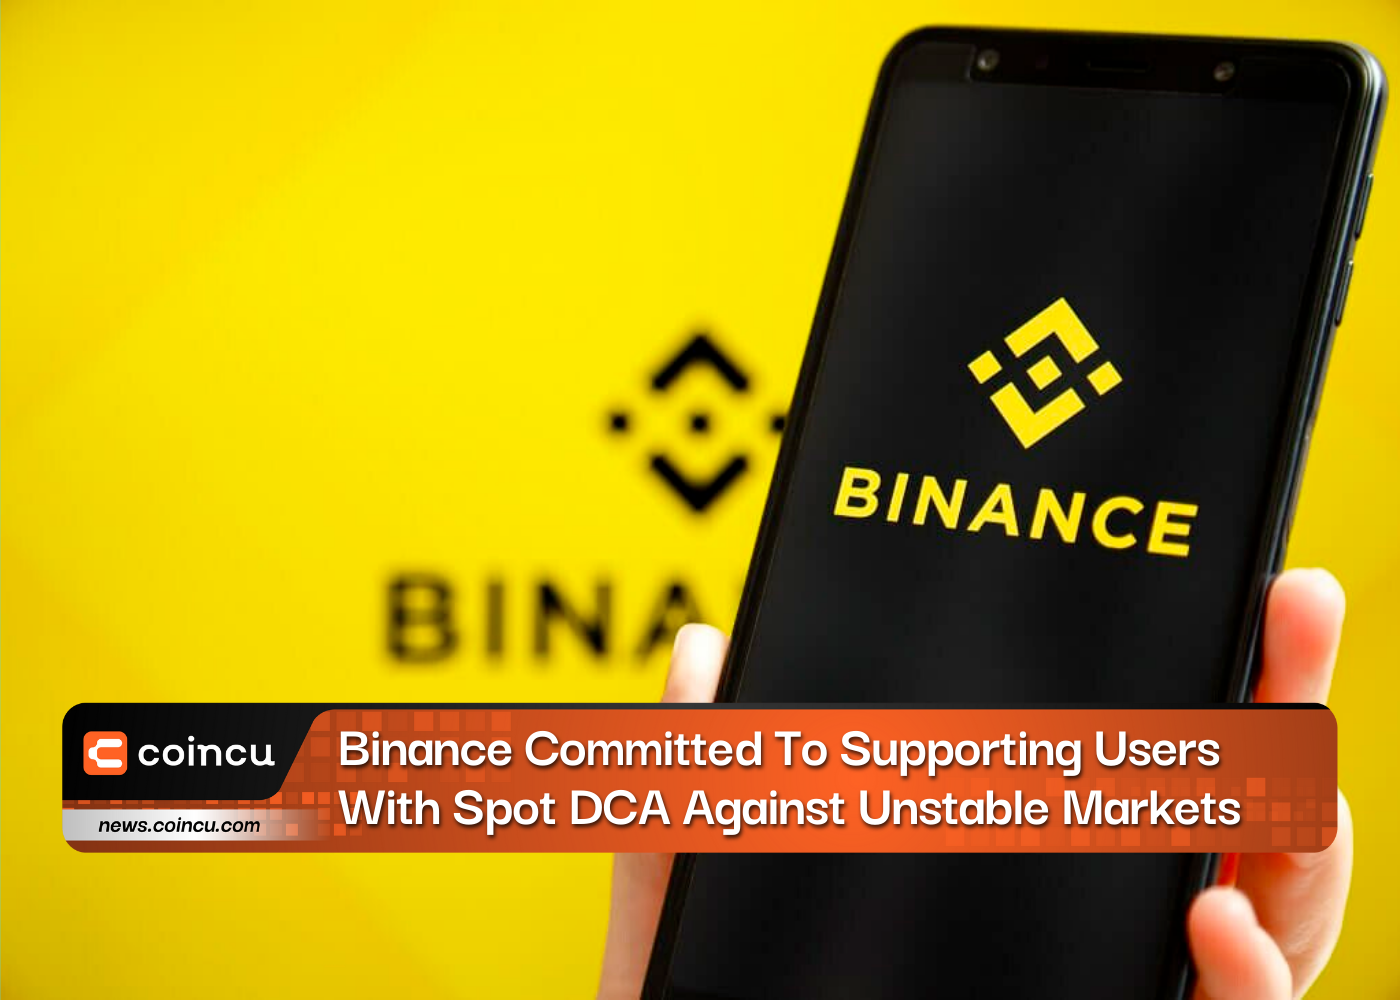 Binance Committed To Supporting Users With Spot DCA Against Unstable Markets